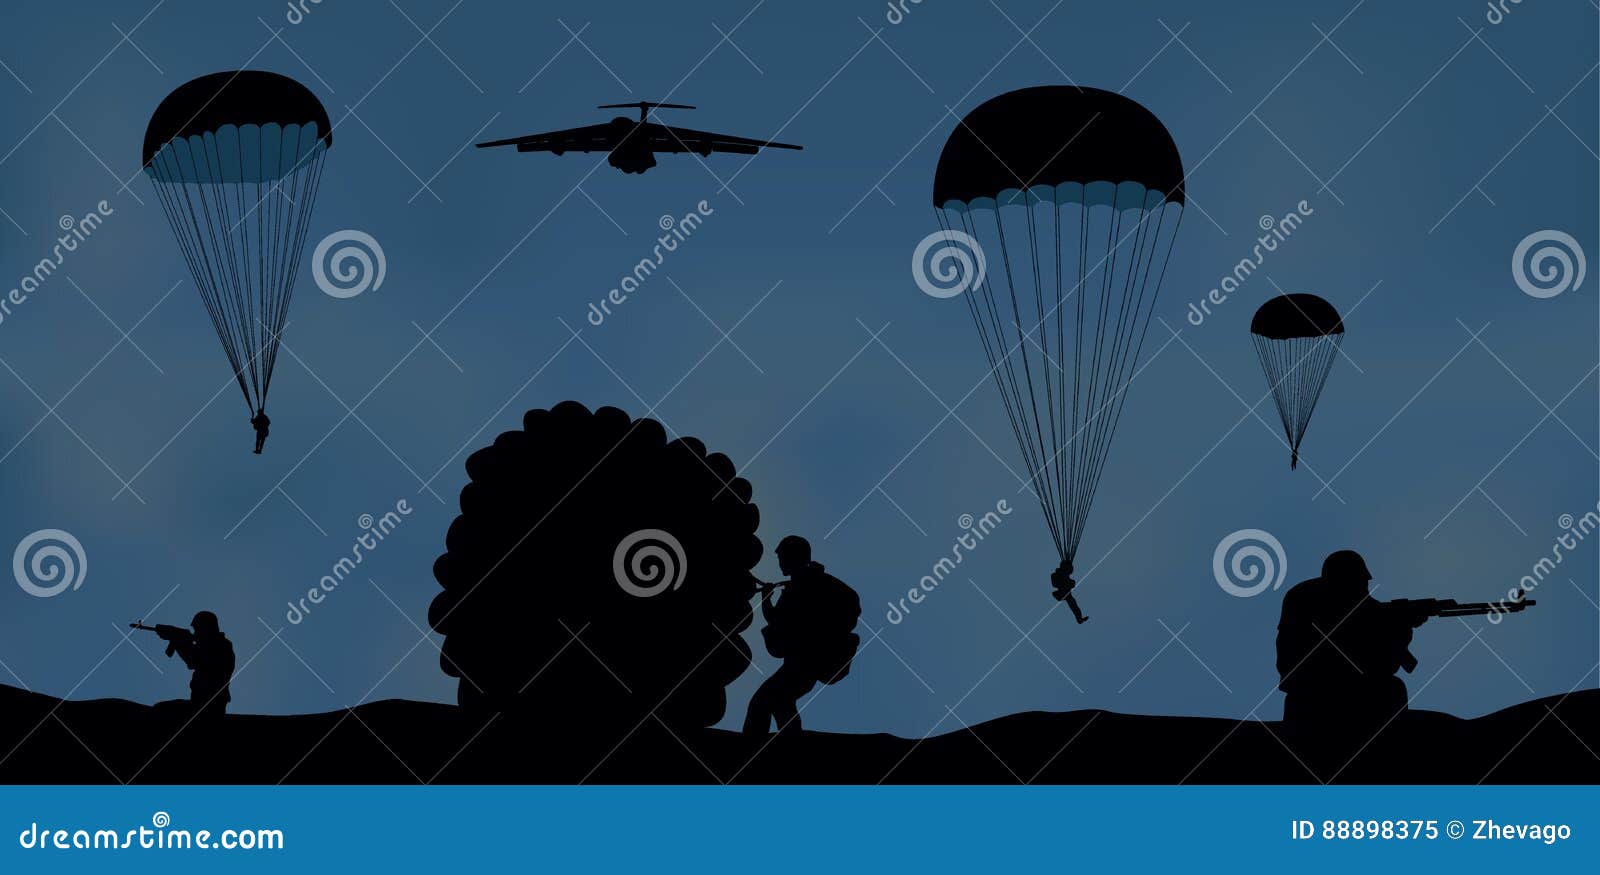 airplane and paratroopers.